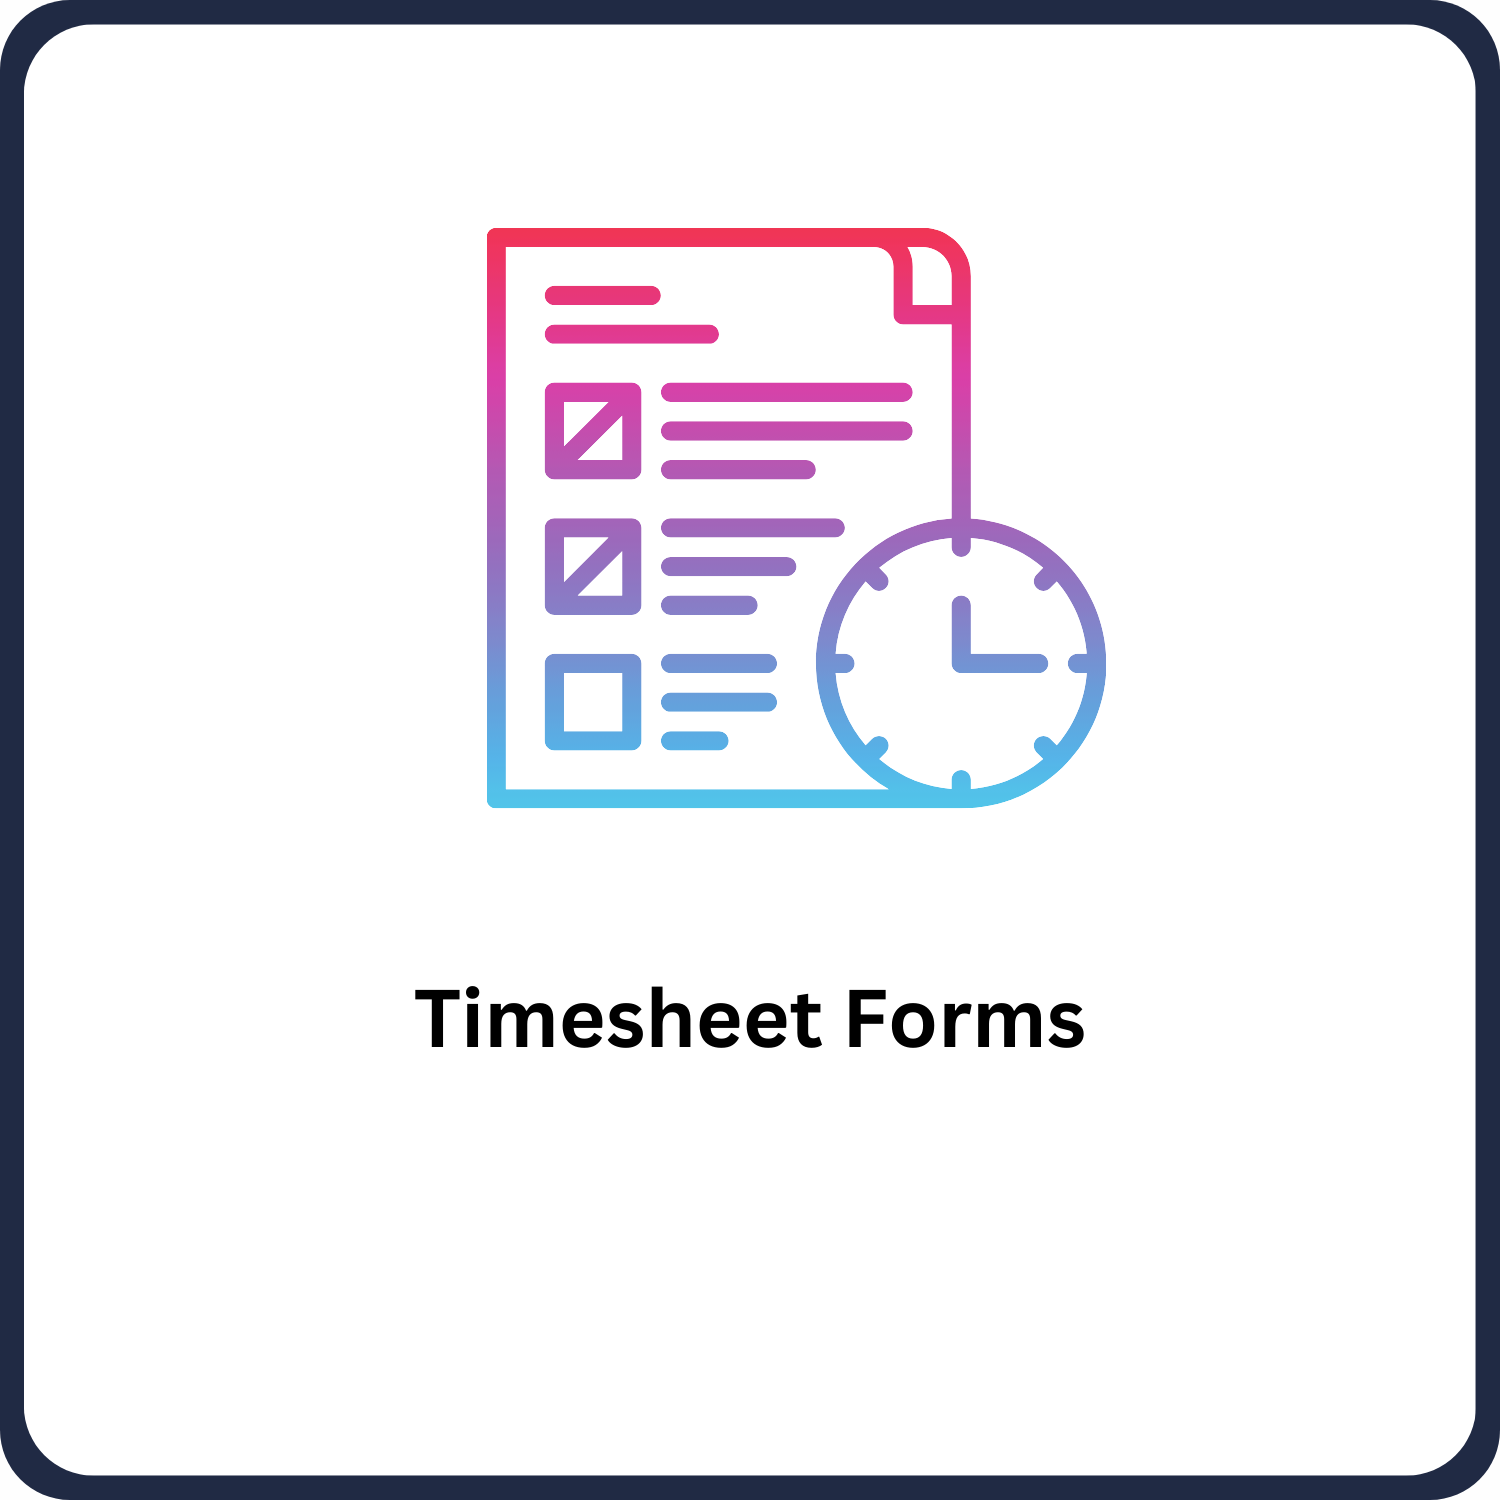 Timesheet Forms